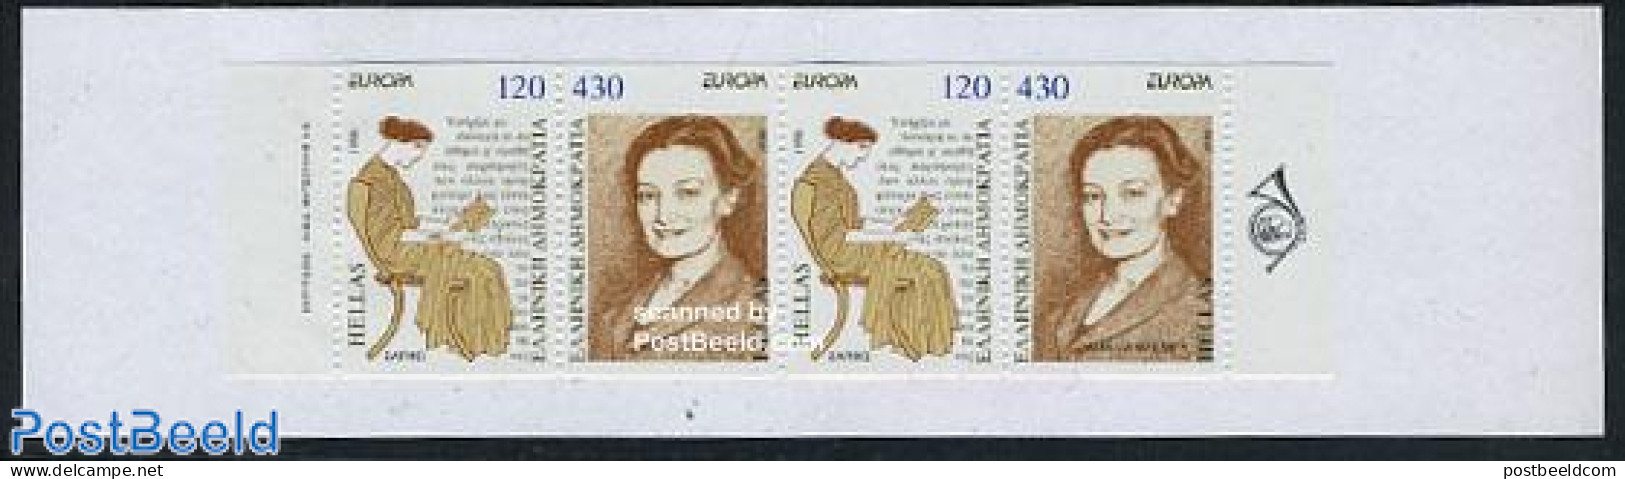 Greece 1996 Europa, Women Booklet, Mint NH, History - Europa (cept) - Women - Stamp Booklets - Art - Authors - Unused Stamps